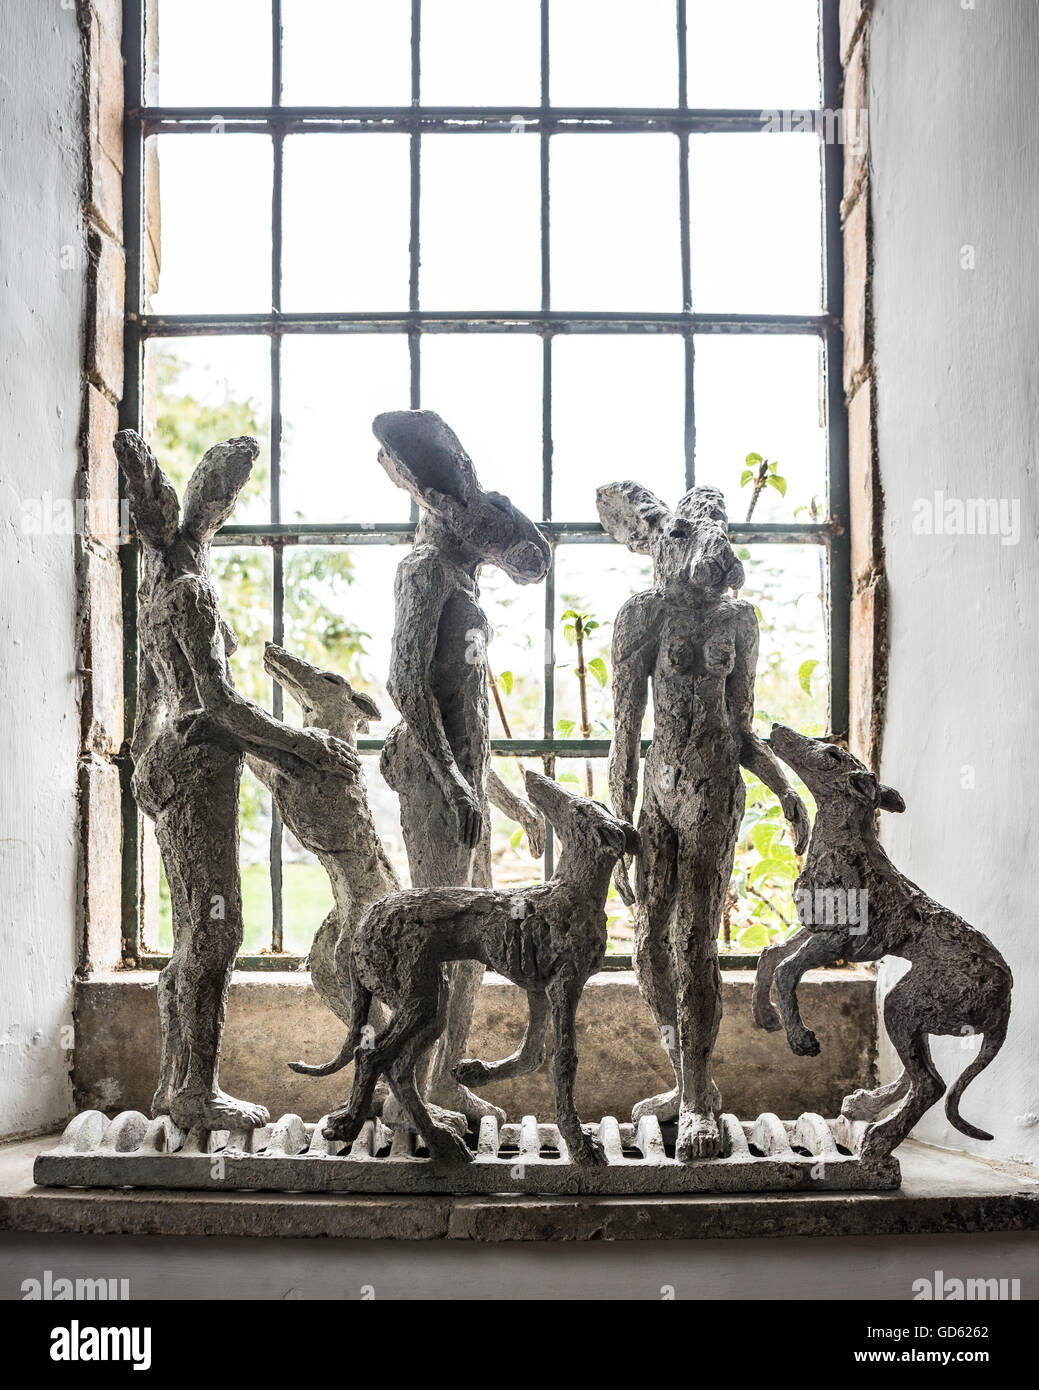 Small Lady-Hare and lurcher maquettes by sophie Ryder on window sill Stock Photo